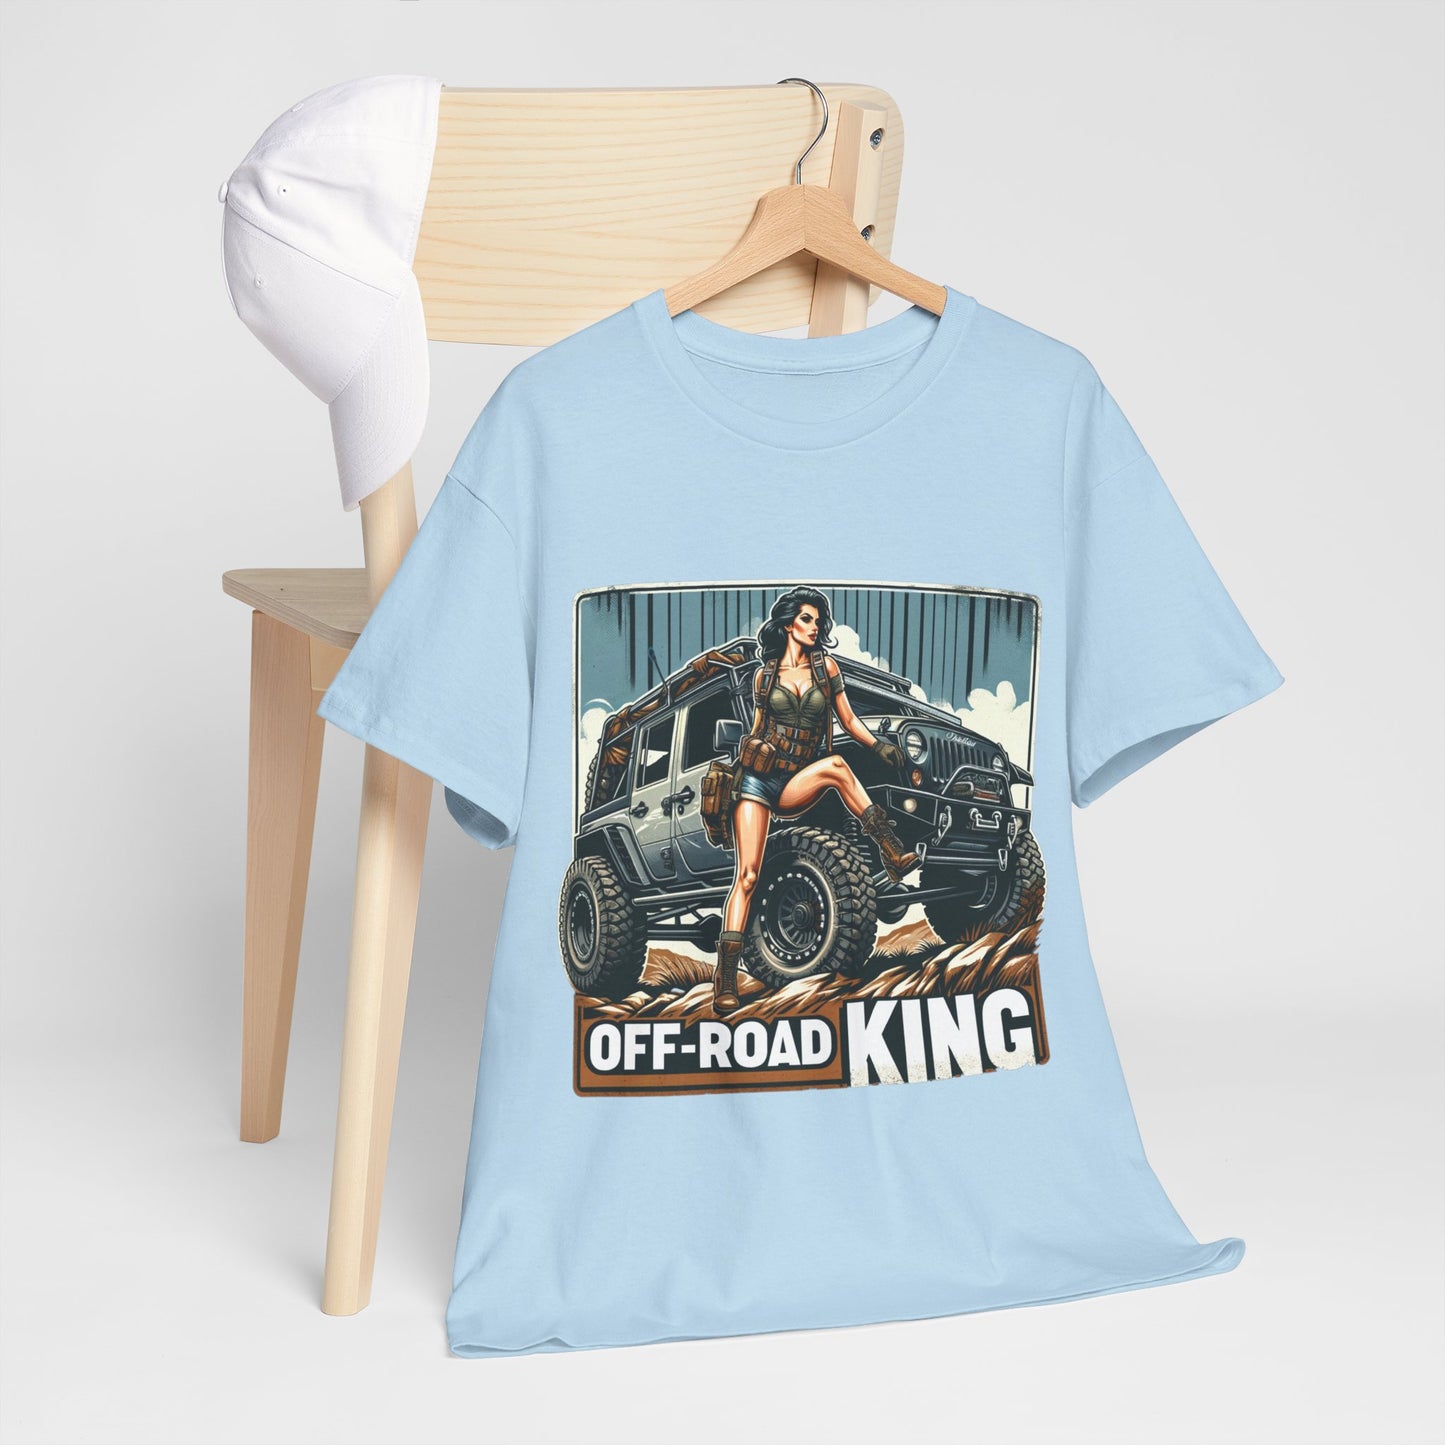 Off-Road King Adventure Tee - Off-Road Vehicle Shirt for Trail Blazers